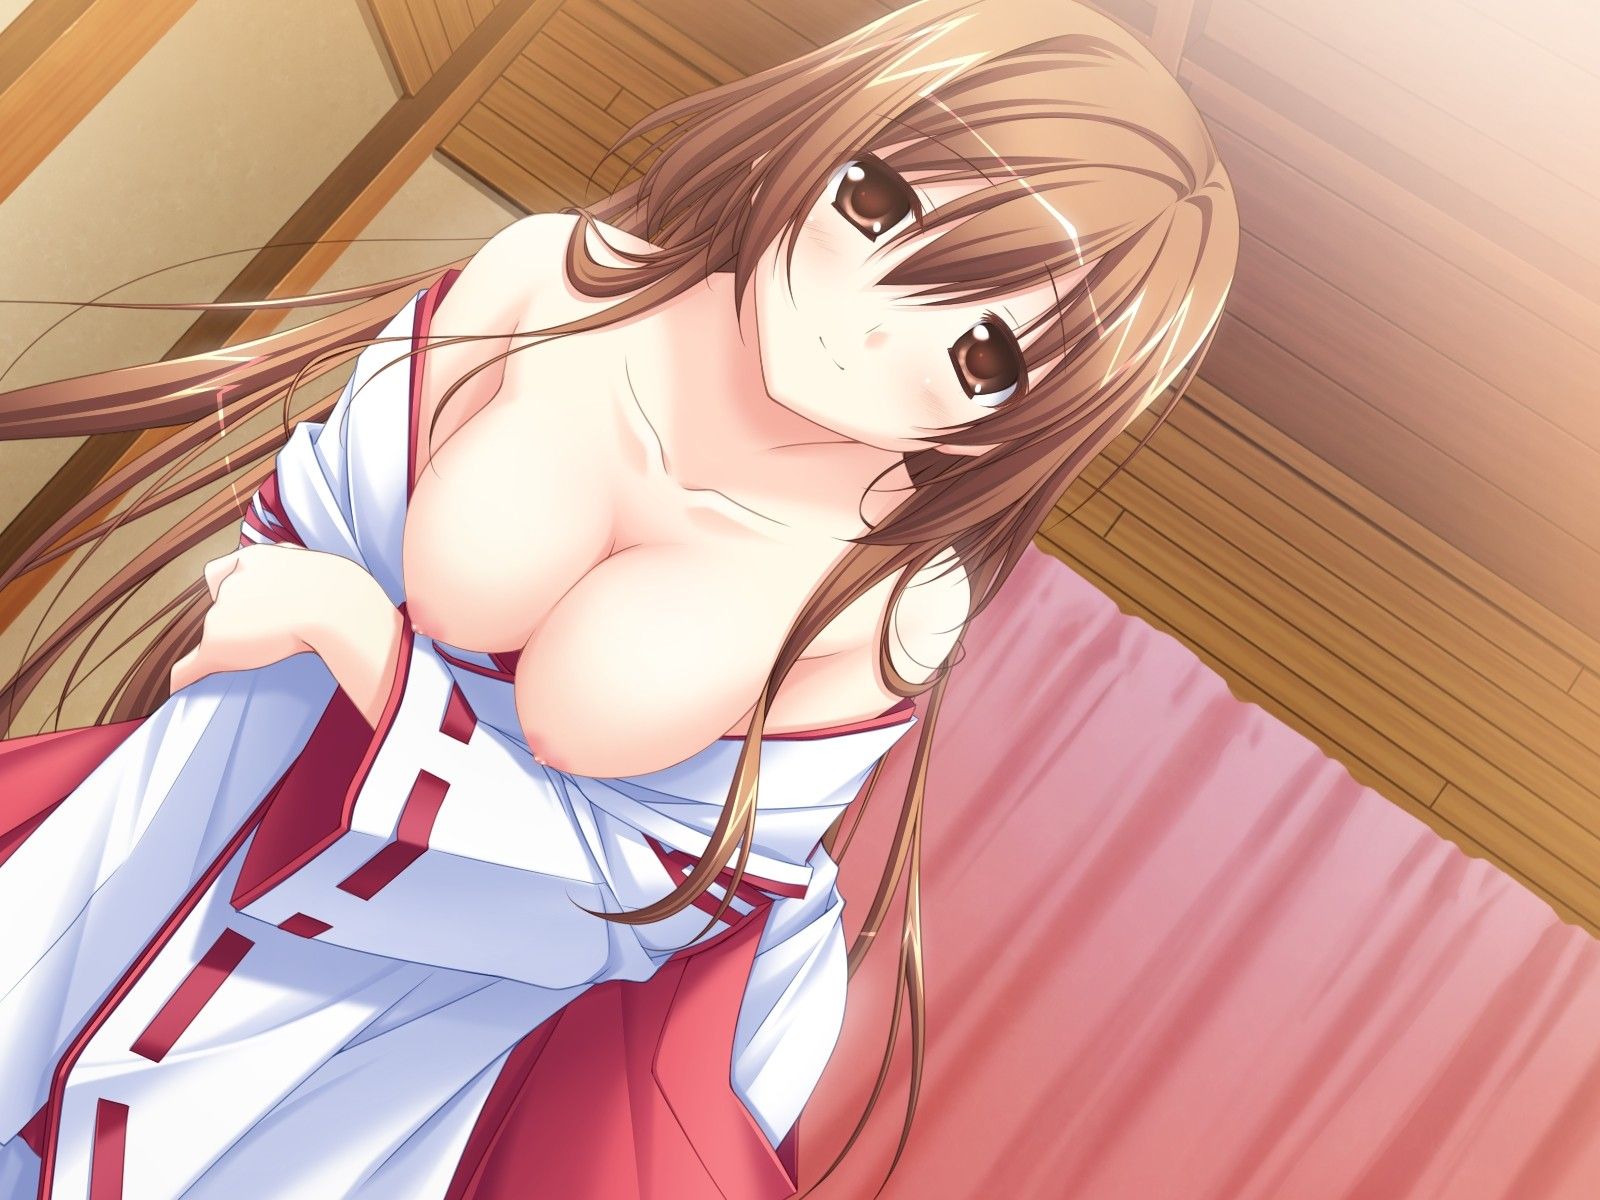 Secondary erotic girls in shrine maiden clothes nasty appearance erotic image [30 pieces] 22